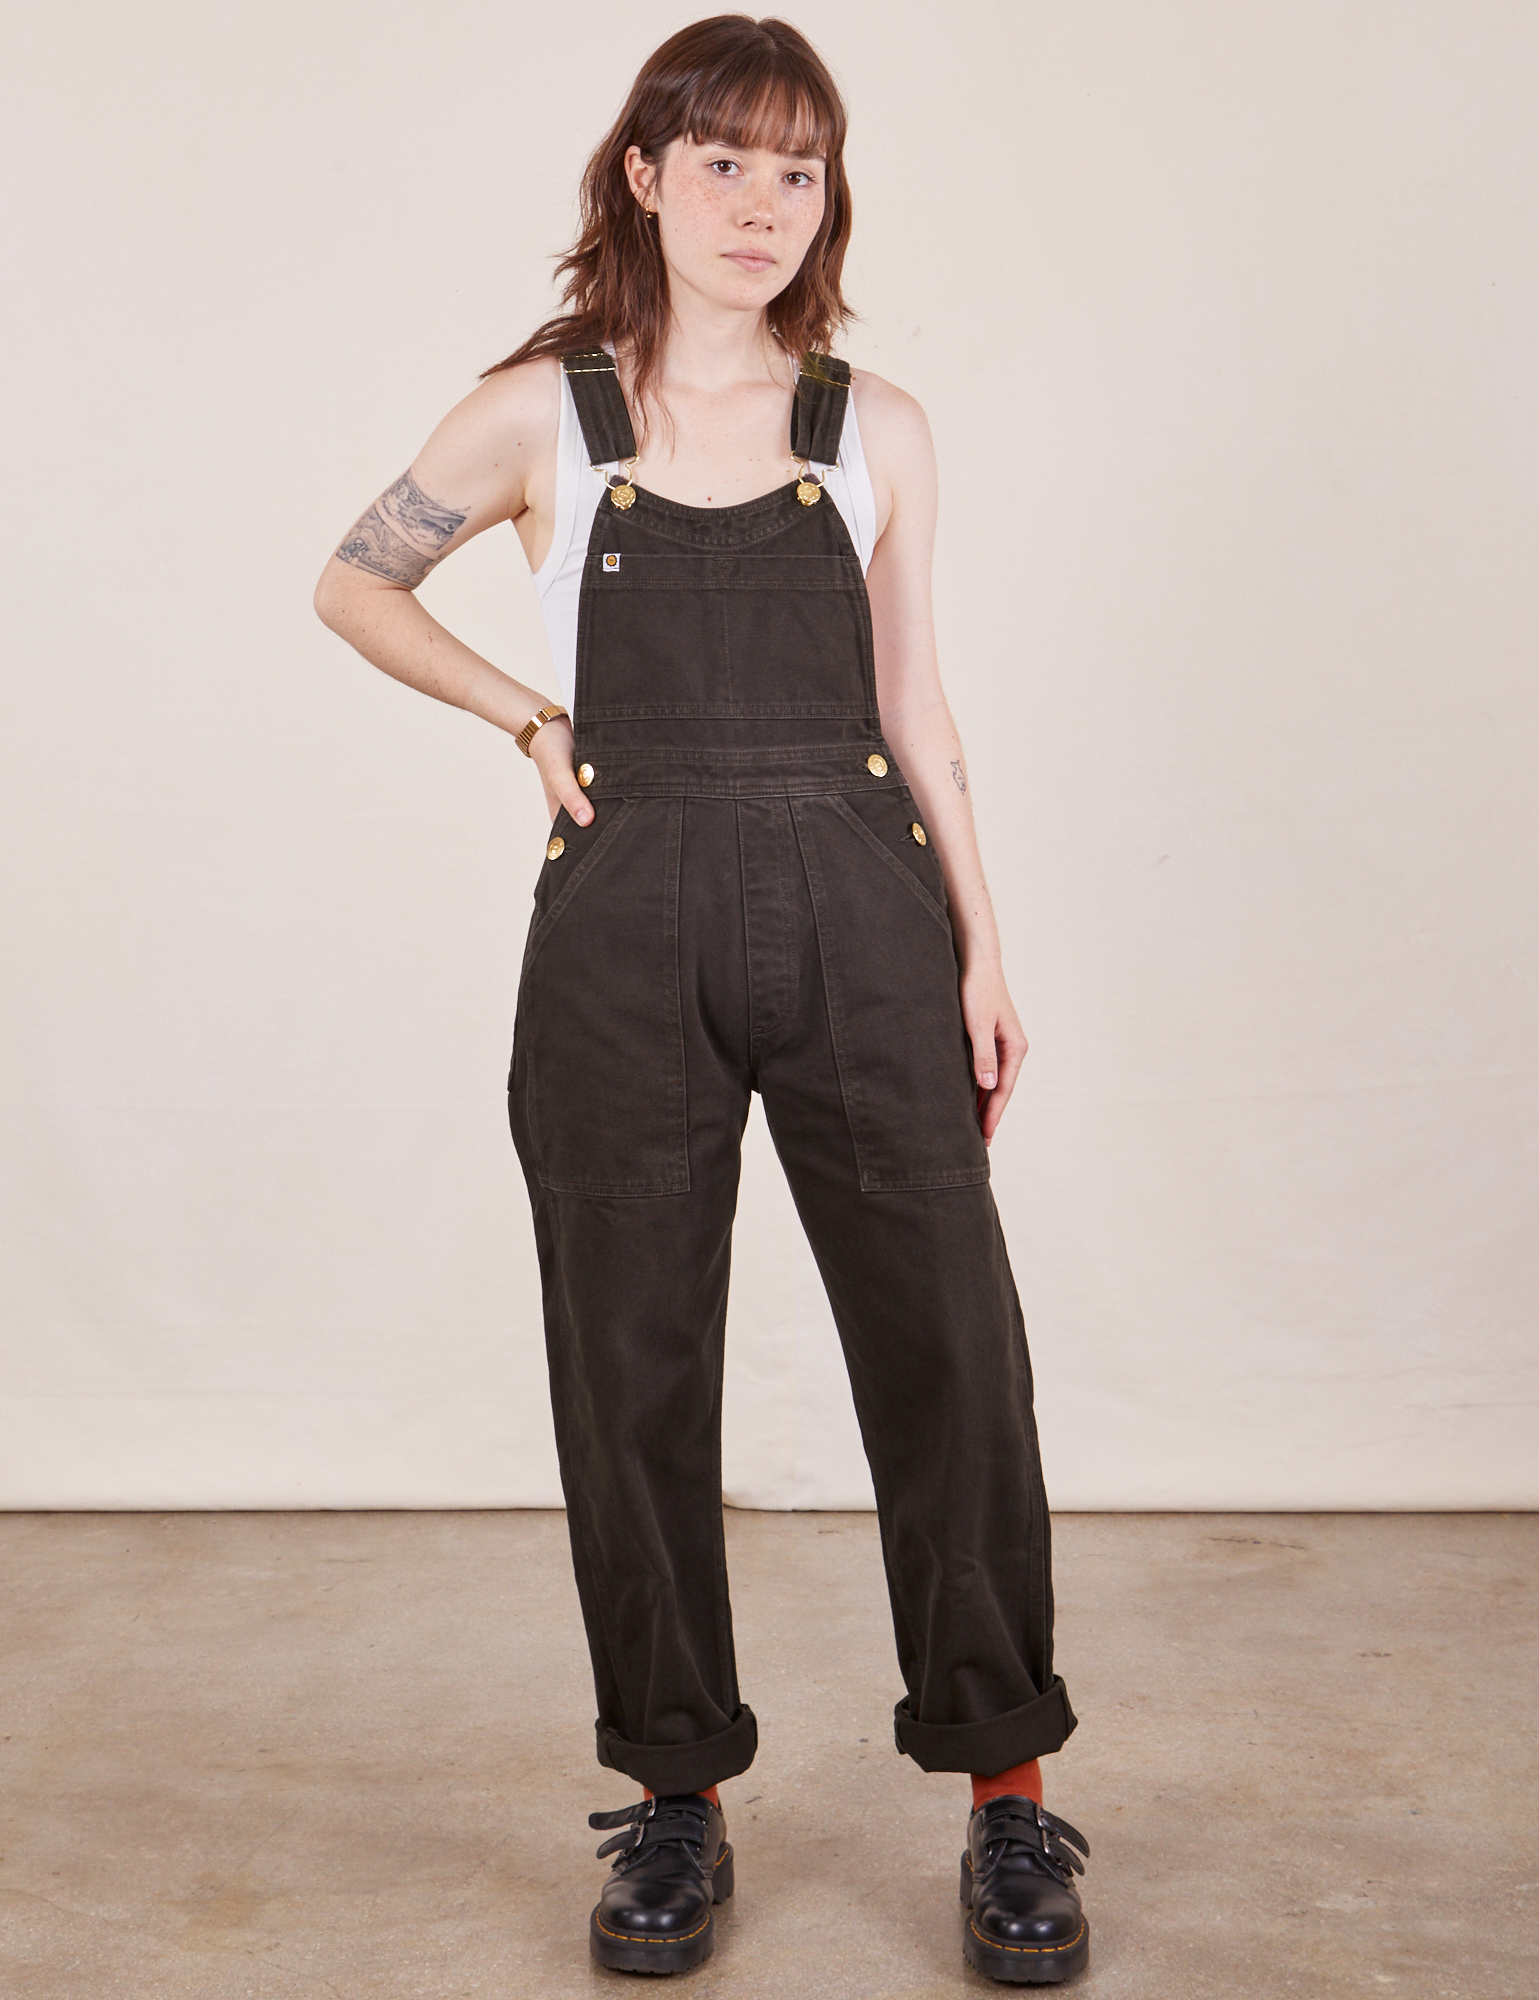 Hana is 5&#39;3&quot; and wearing size P Original Overalls in Mono Espresso with a vintage off-white Cropped Tank Top.